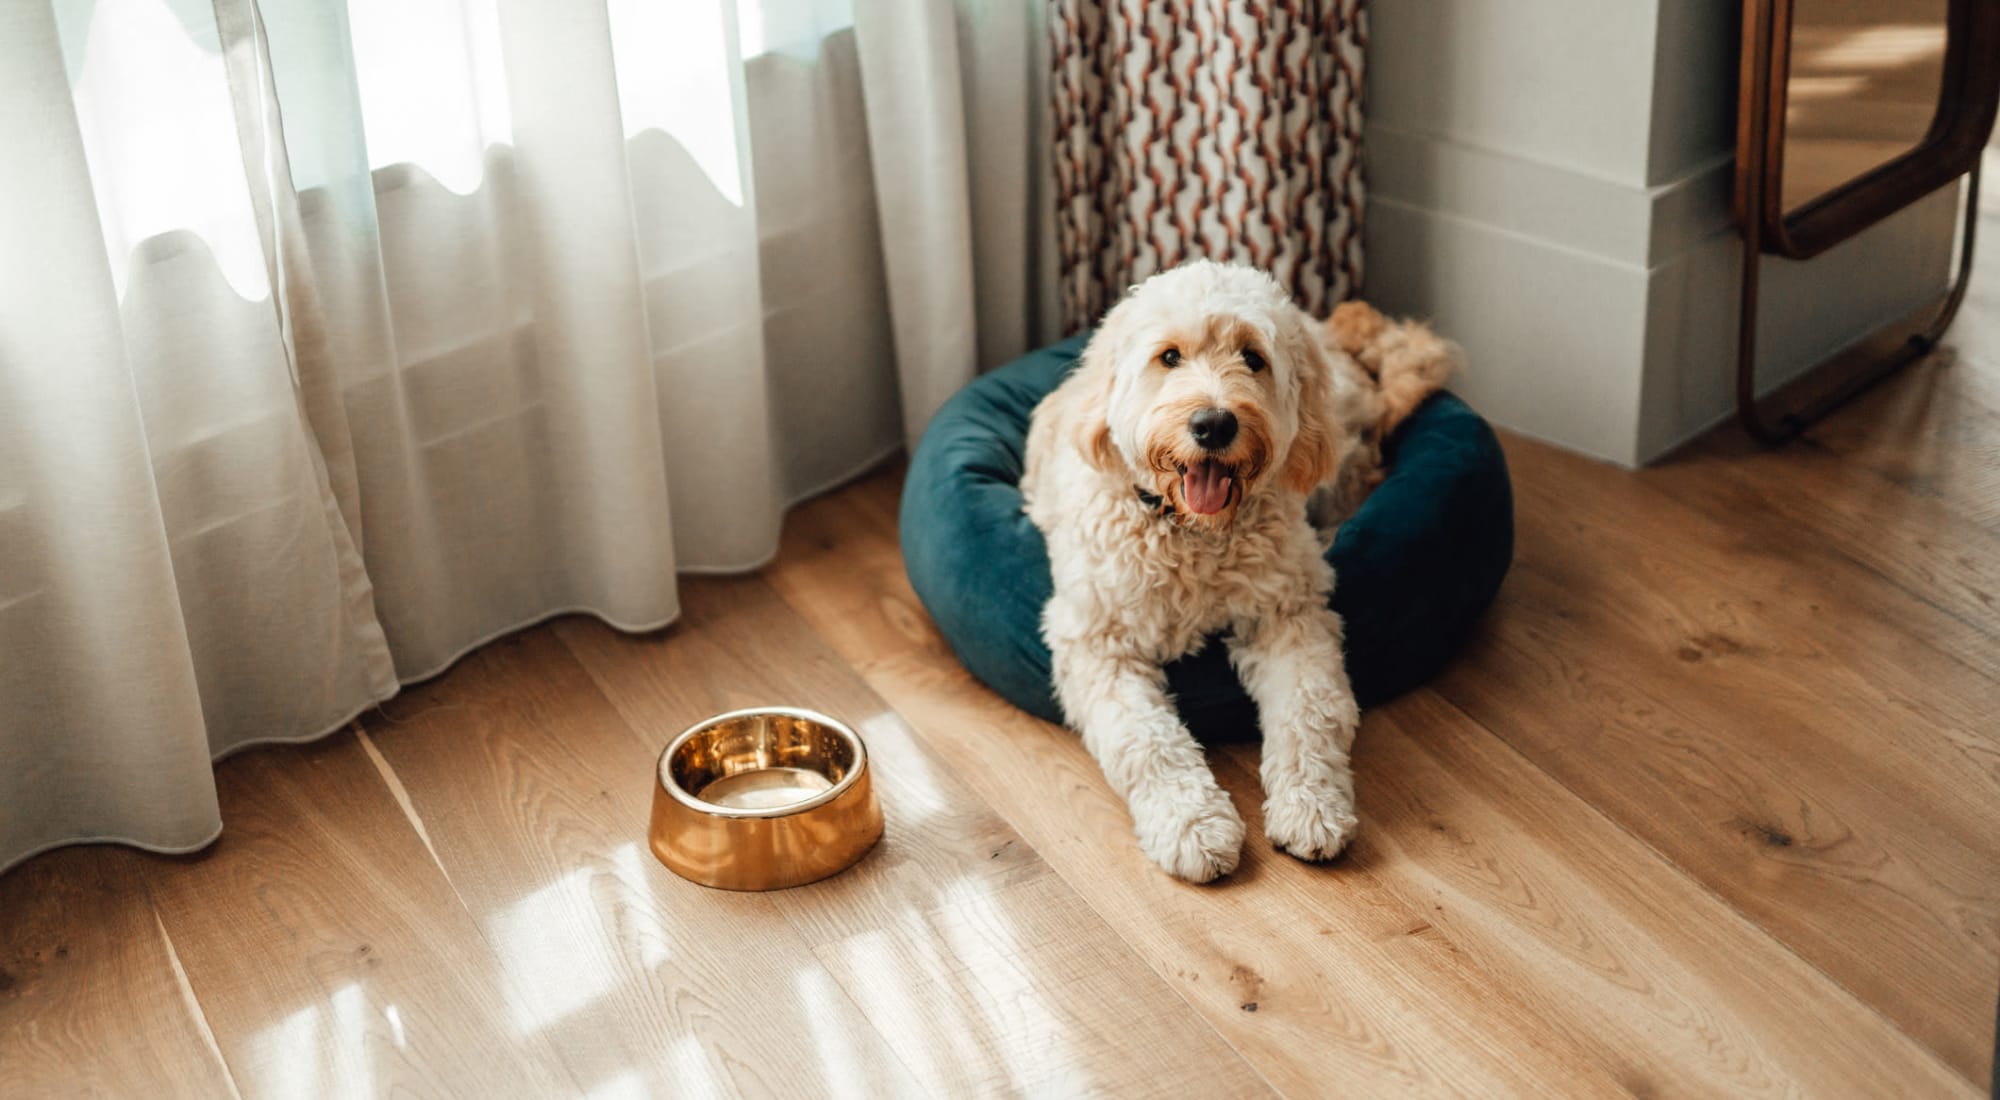 Pet-friendly apartments at 17 Barkley in Gaithersburg, Maryland